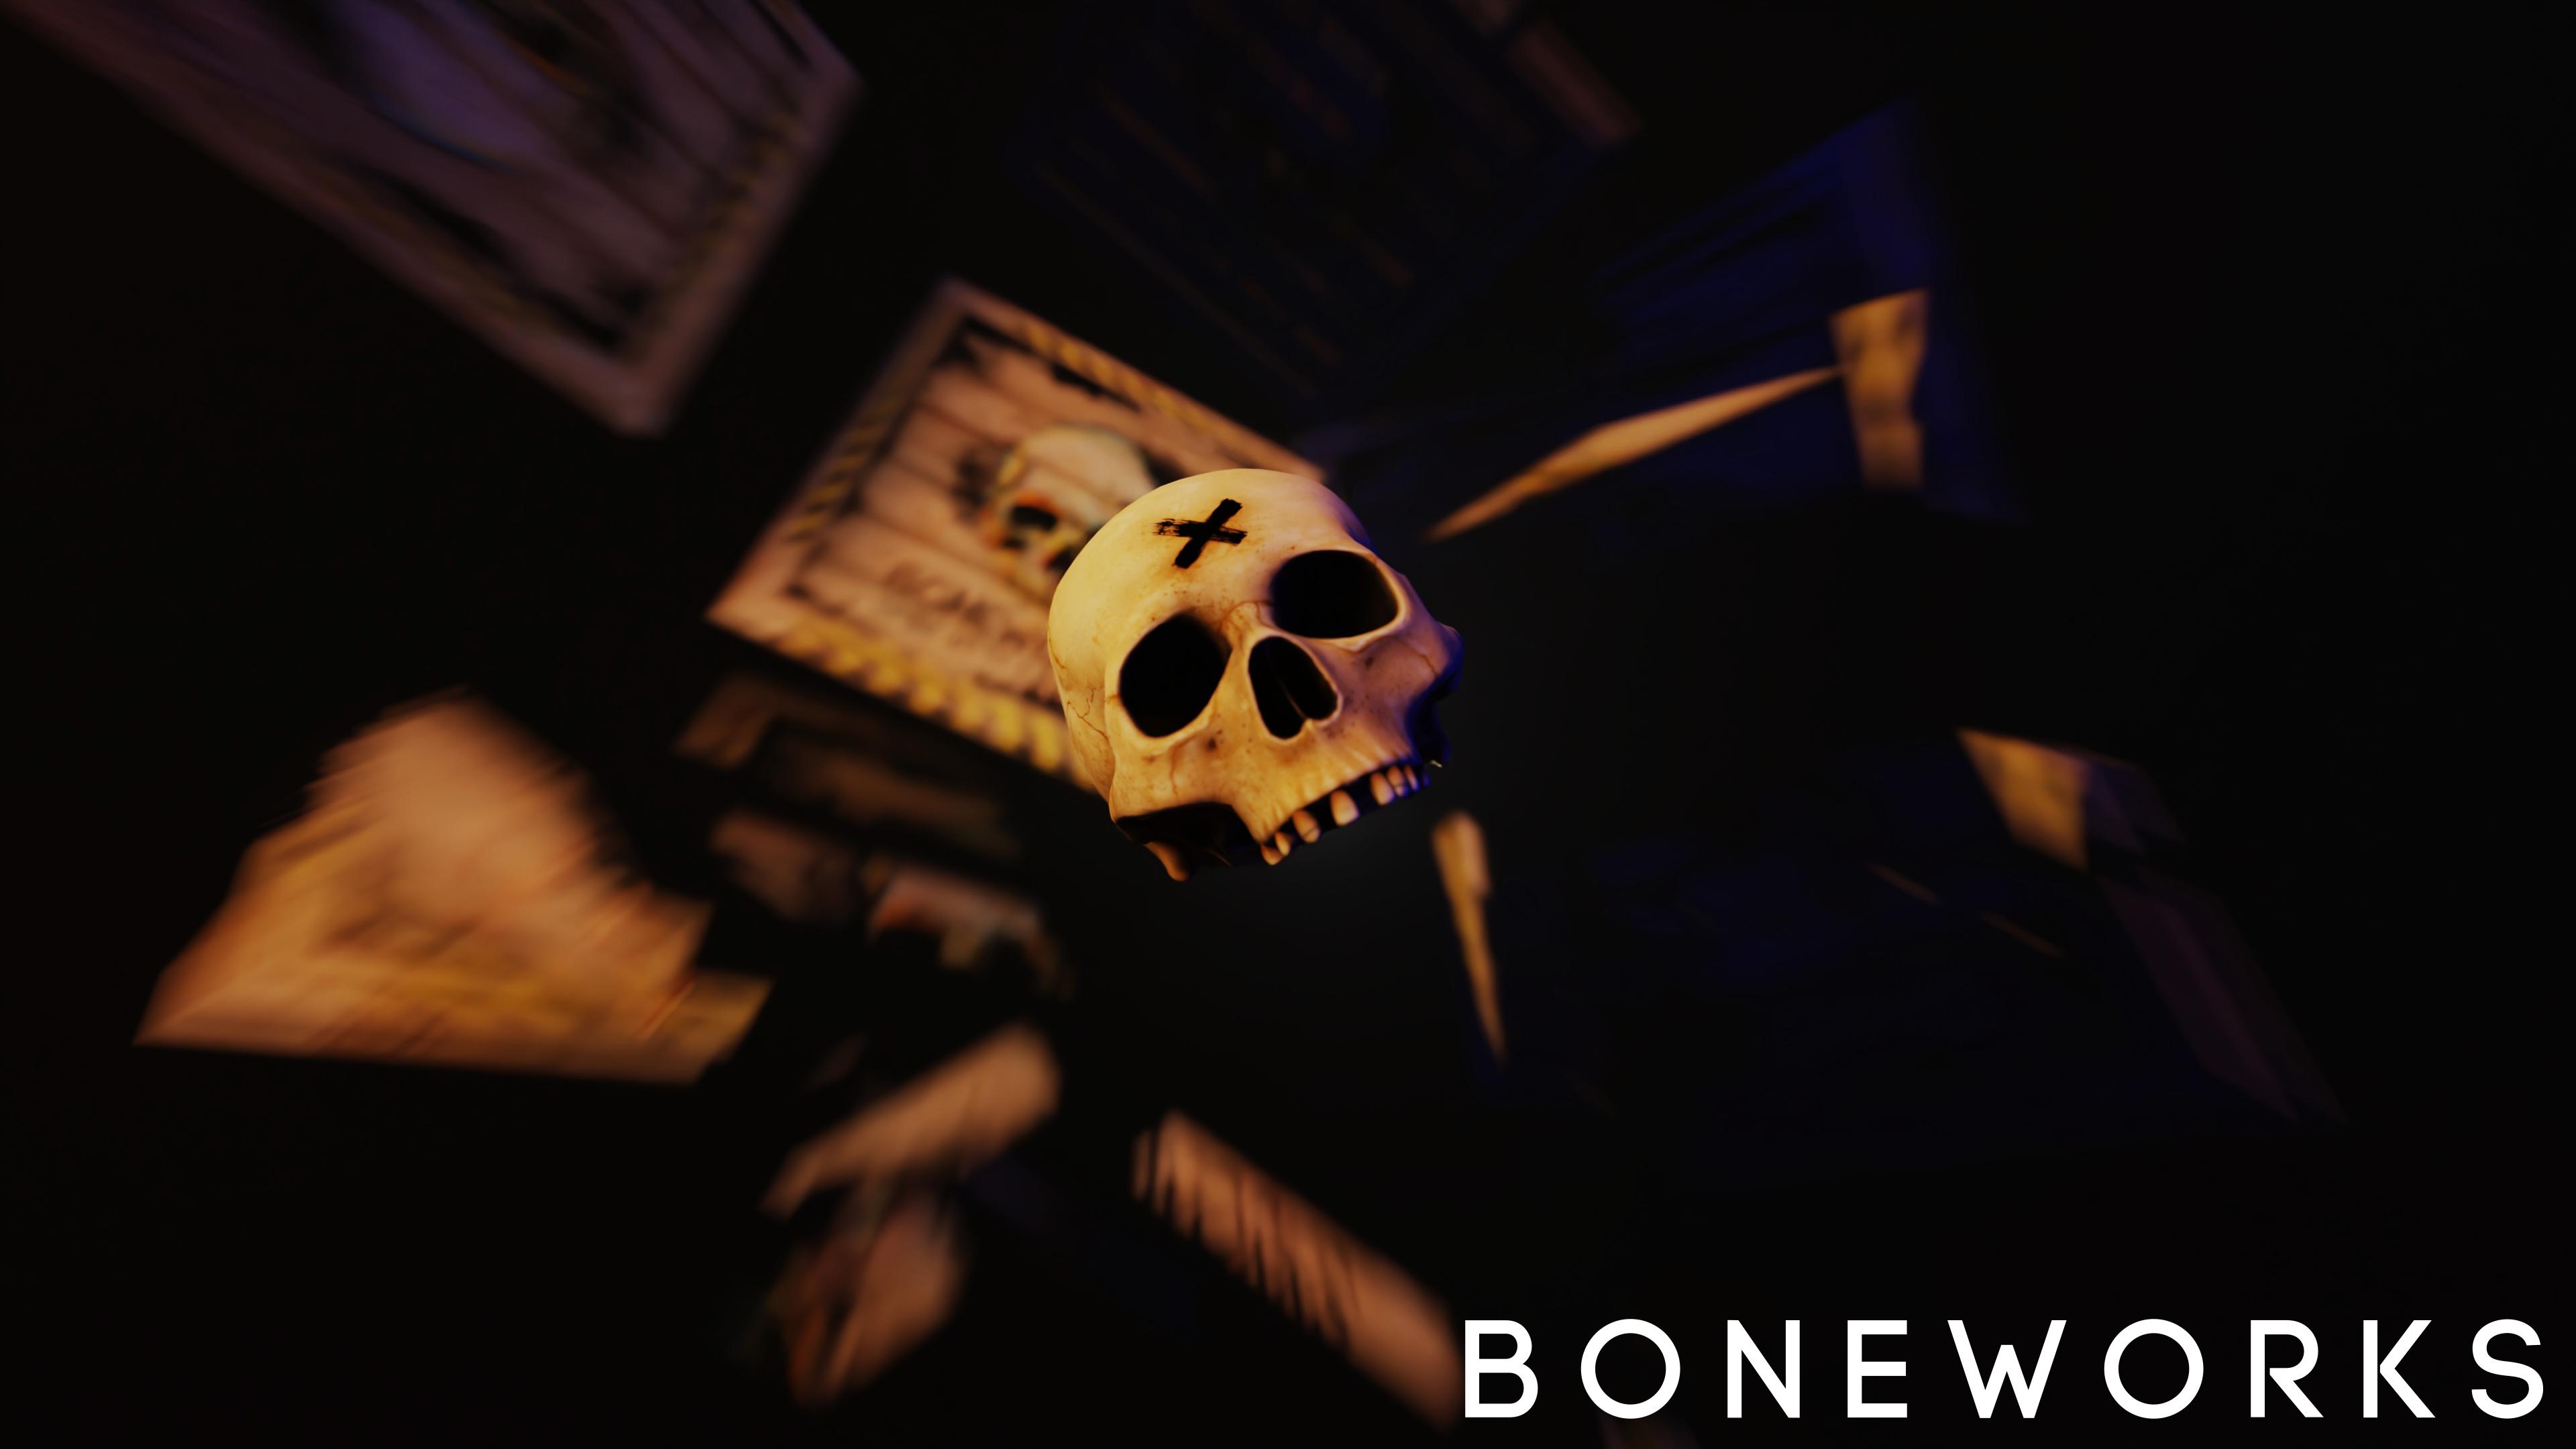 Rendered out a 4k wallpaper using assets from Boneworks